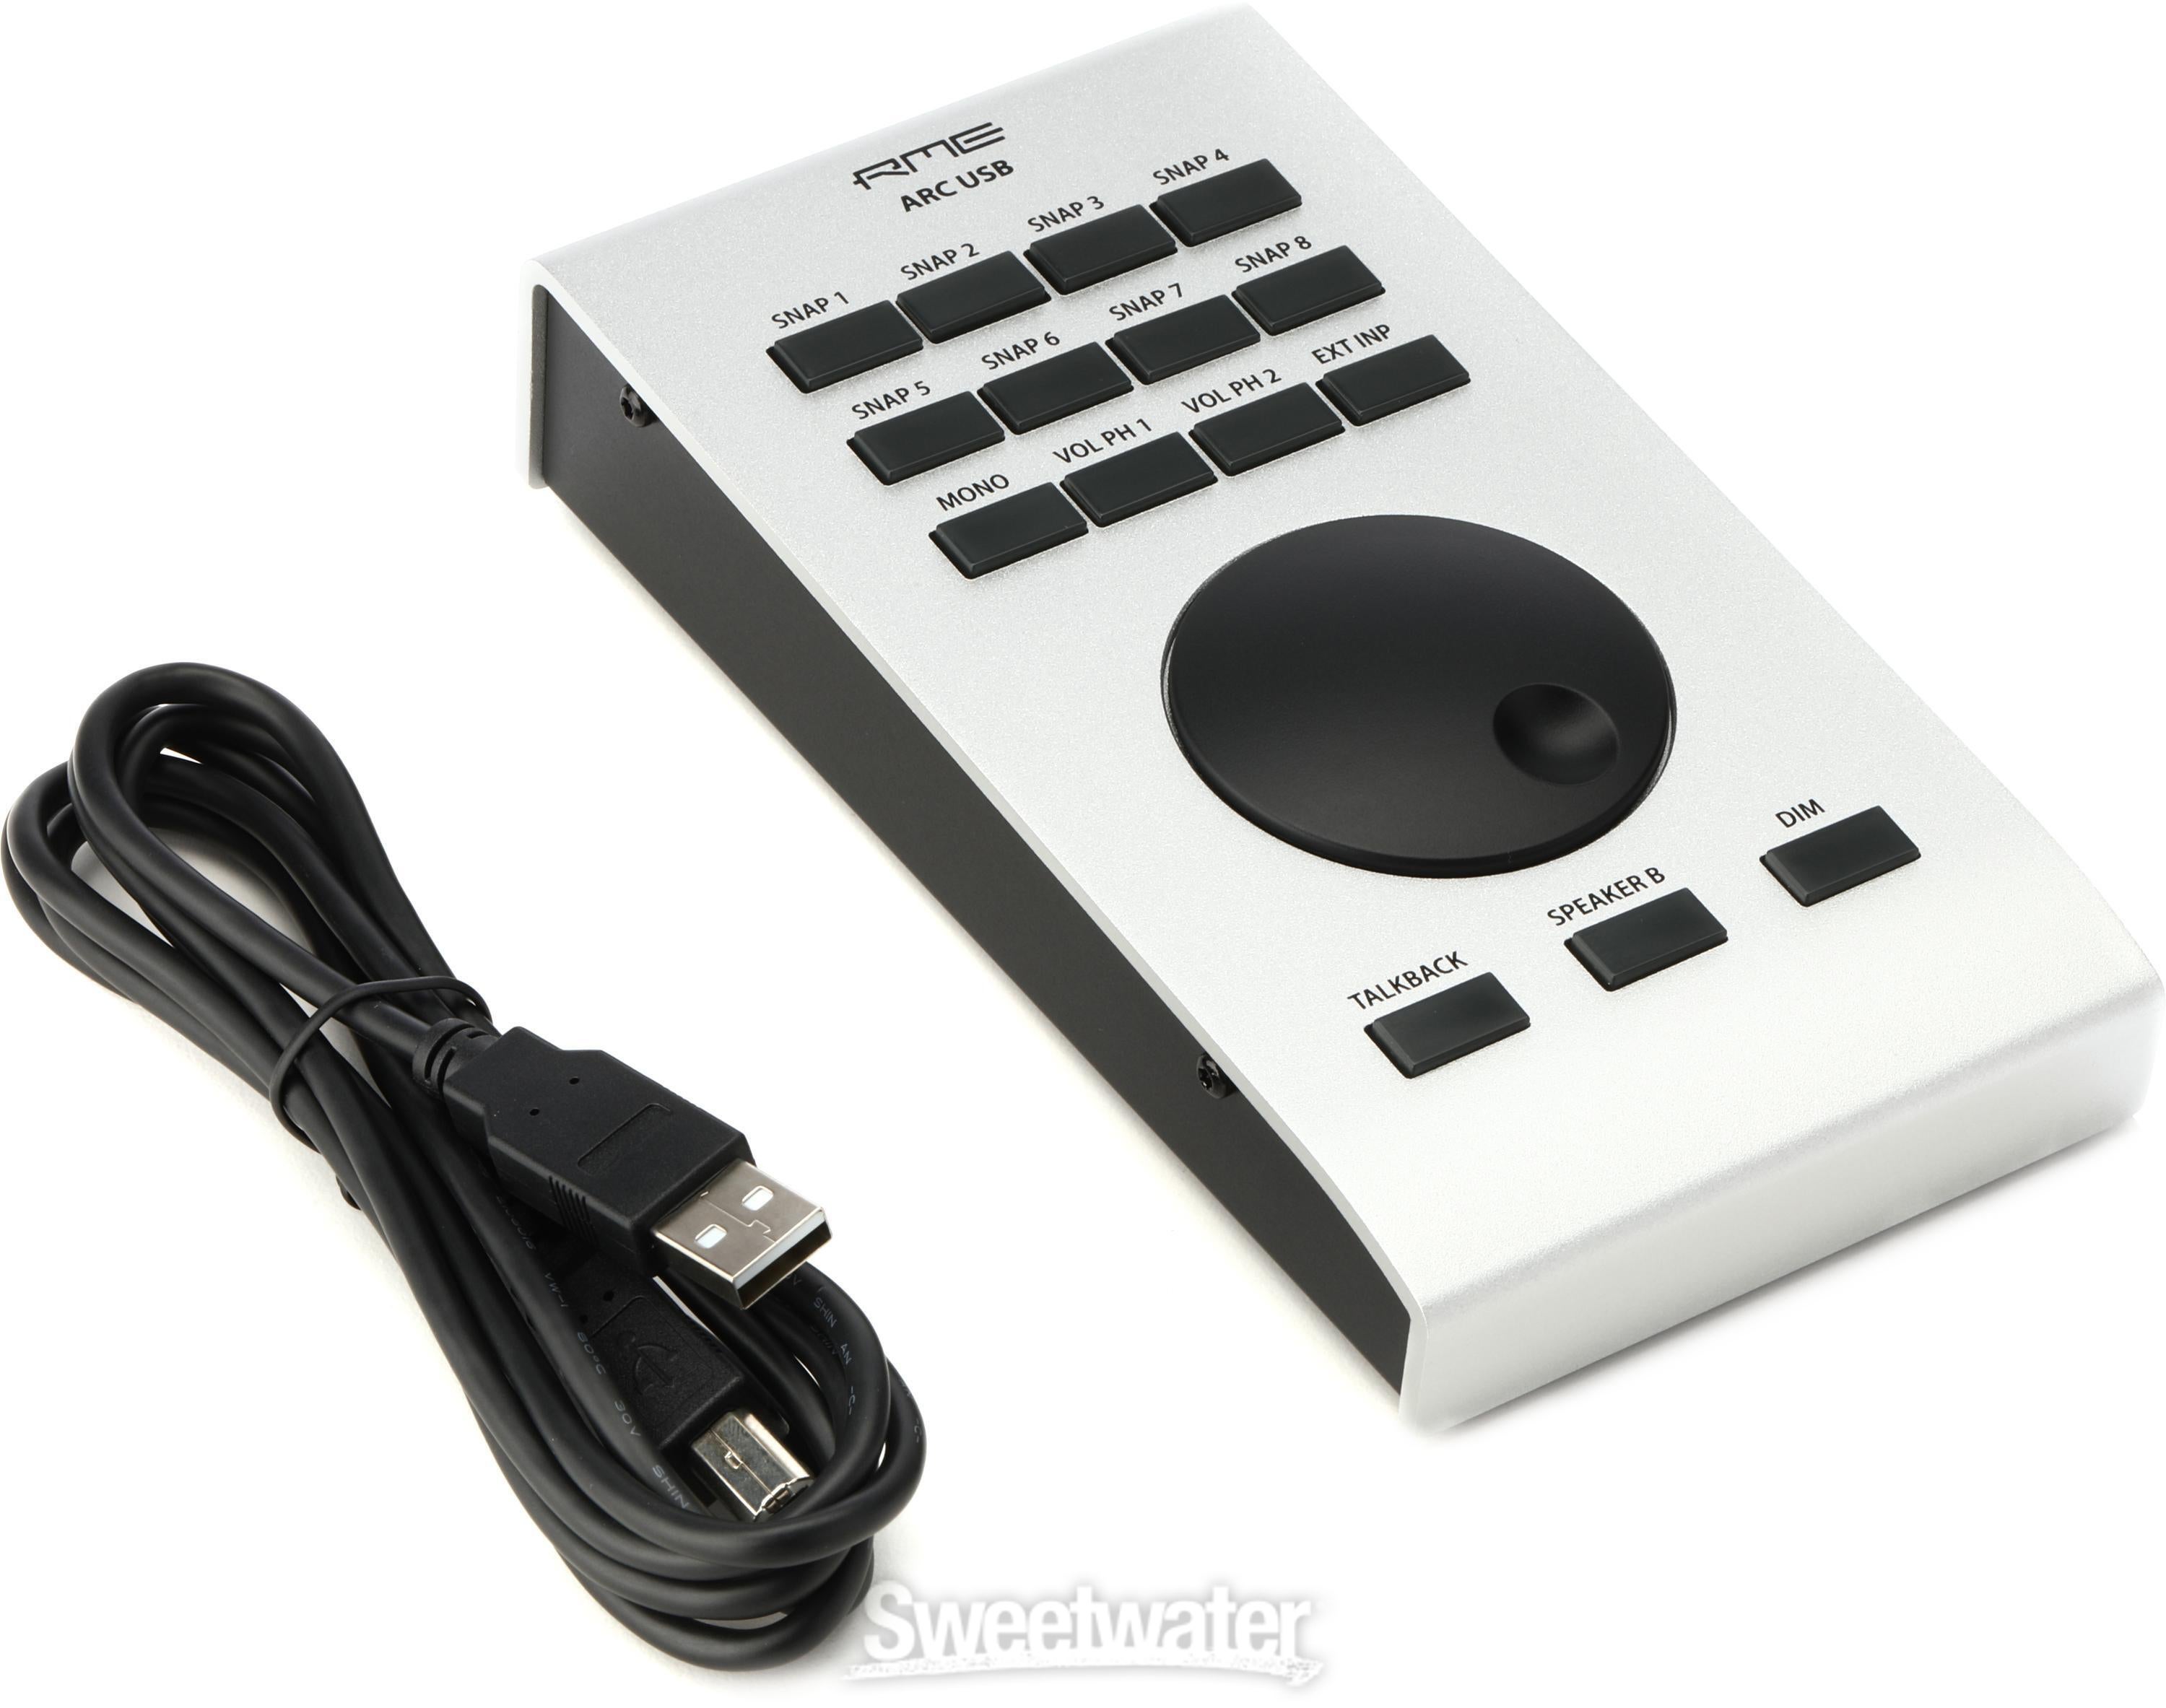 RME ARC-USB Advanced Remote Control | Sweetwater